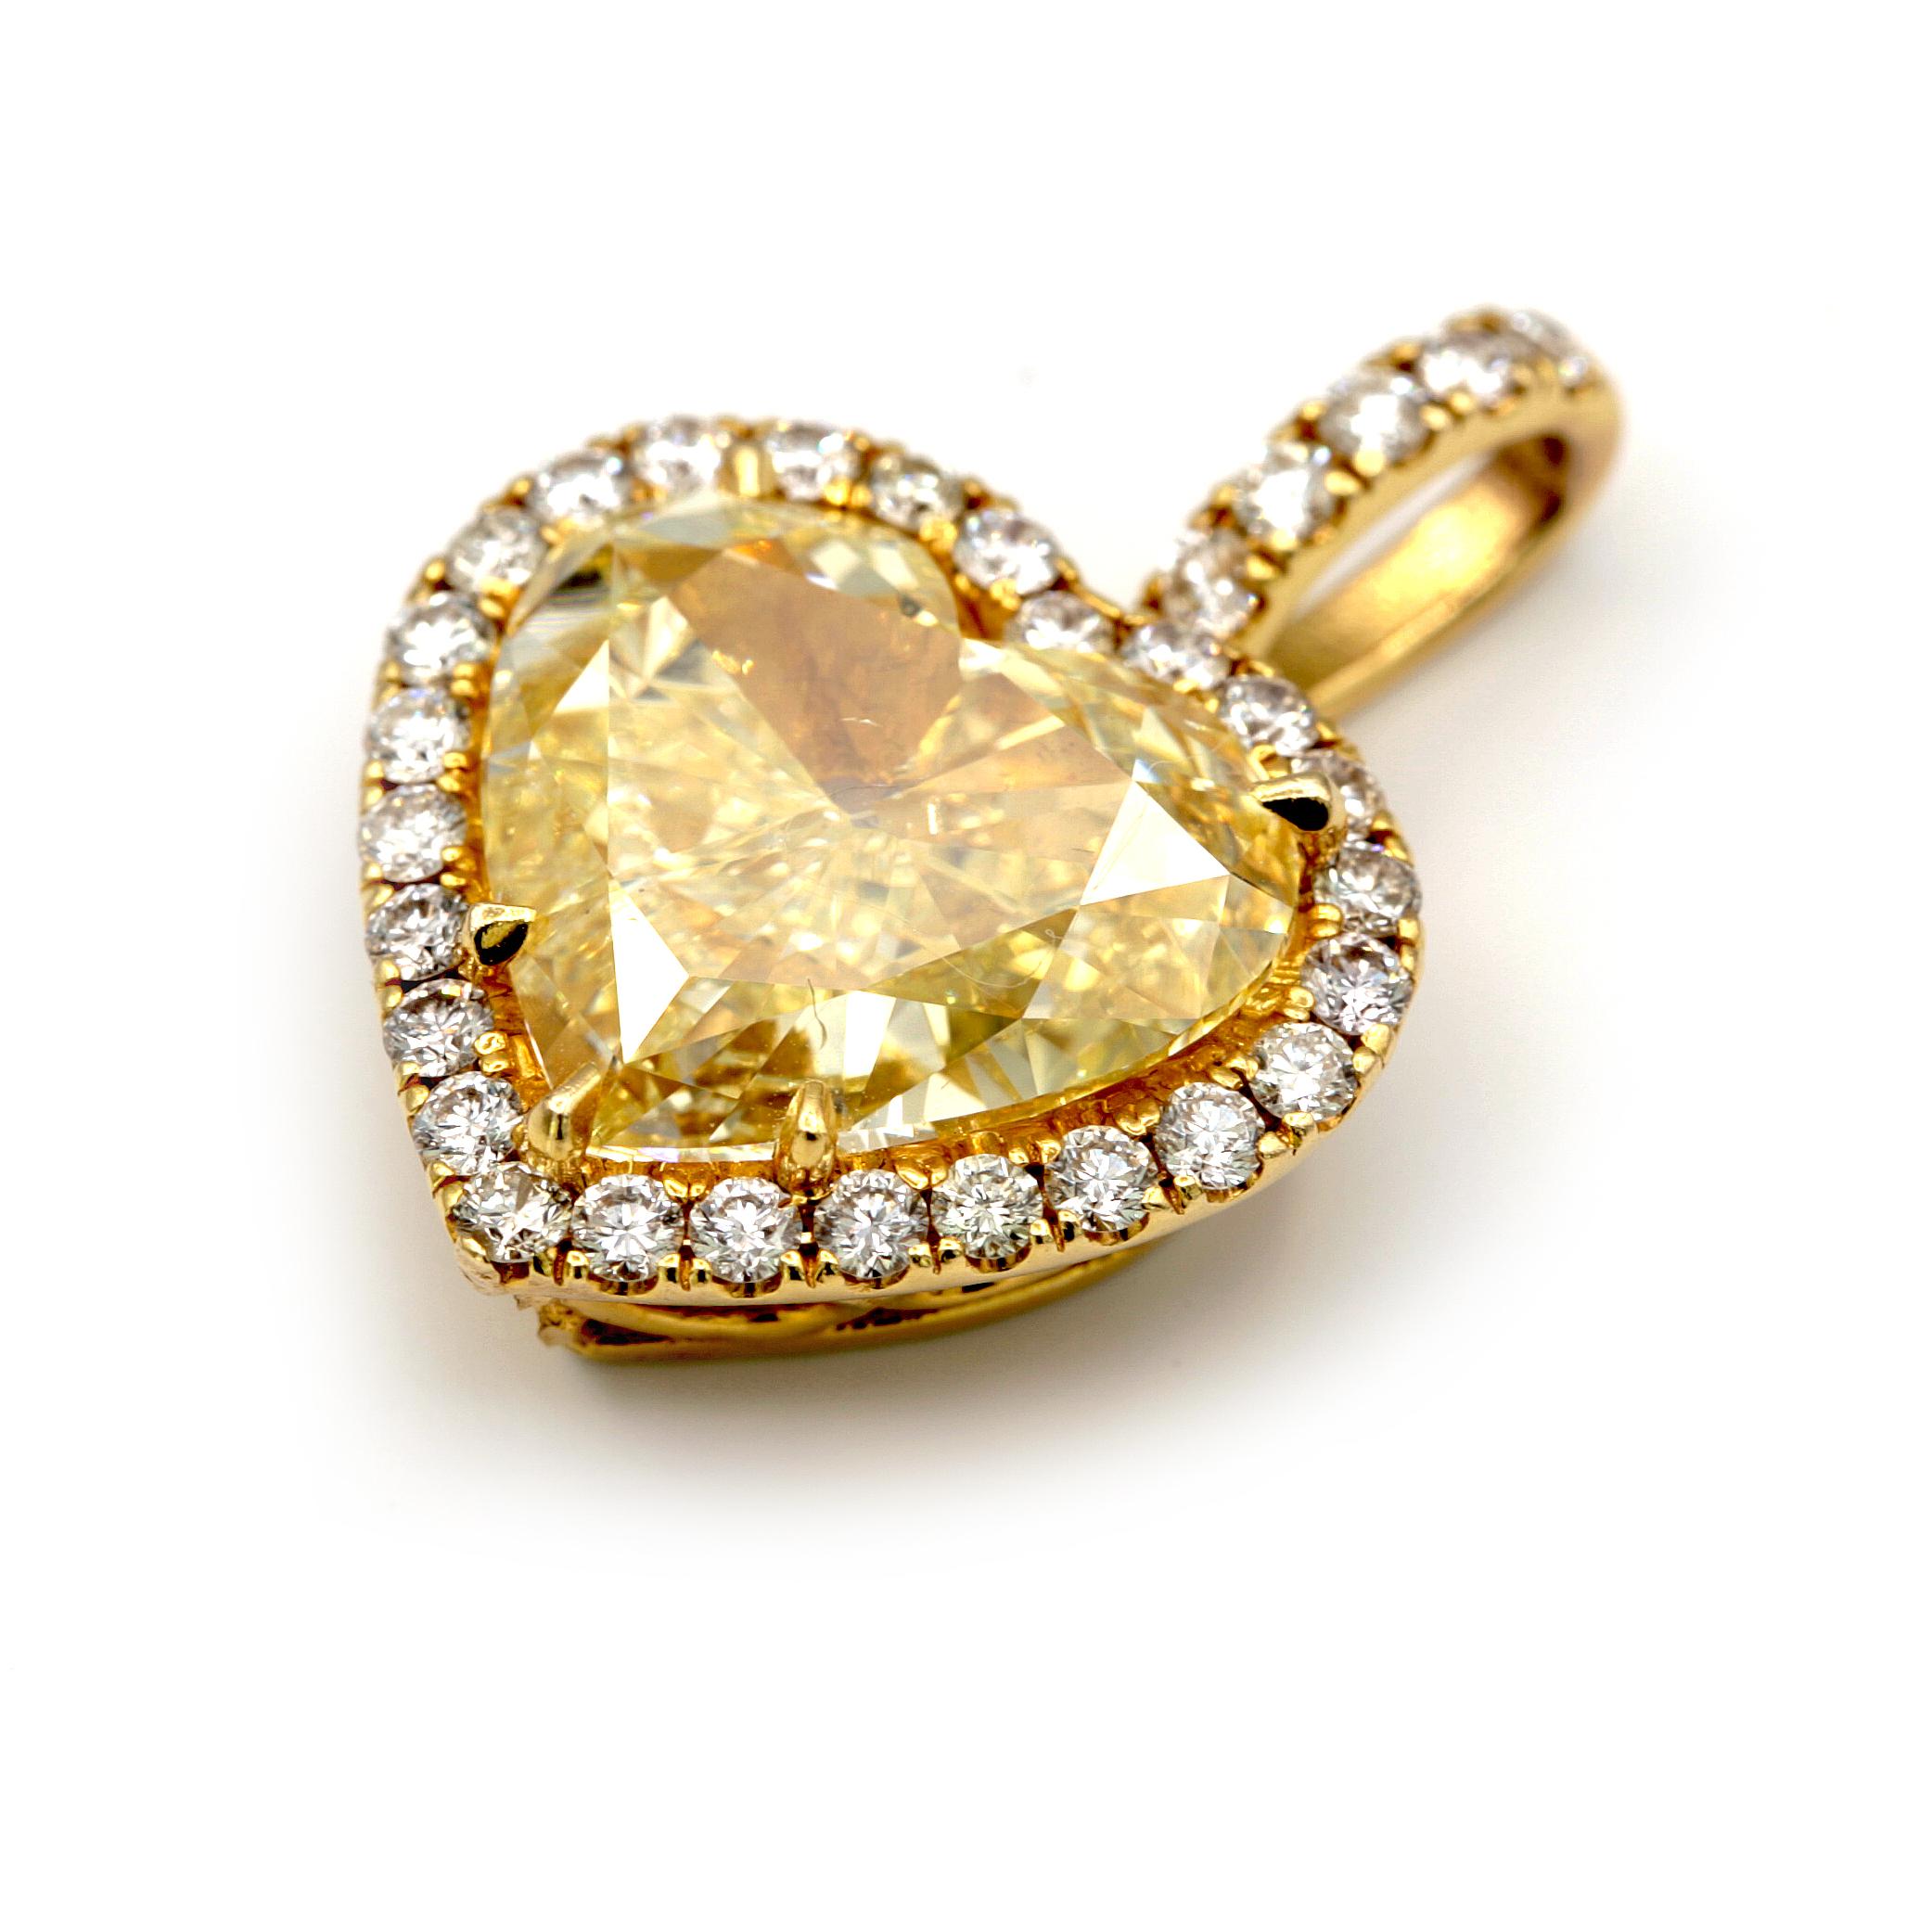 This 10.03 carat Yellow heart shape Diamond set in 18 karat yellow gold with 30 round white diamonds totaling approximately 1.50 carat. This spectacularly cut heart shape Yellow Diamond measures 20 x 19 millimeters.
